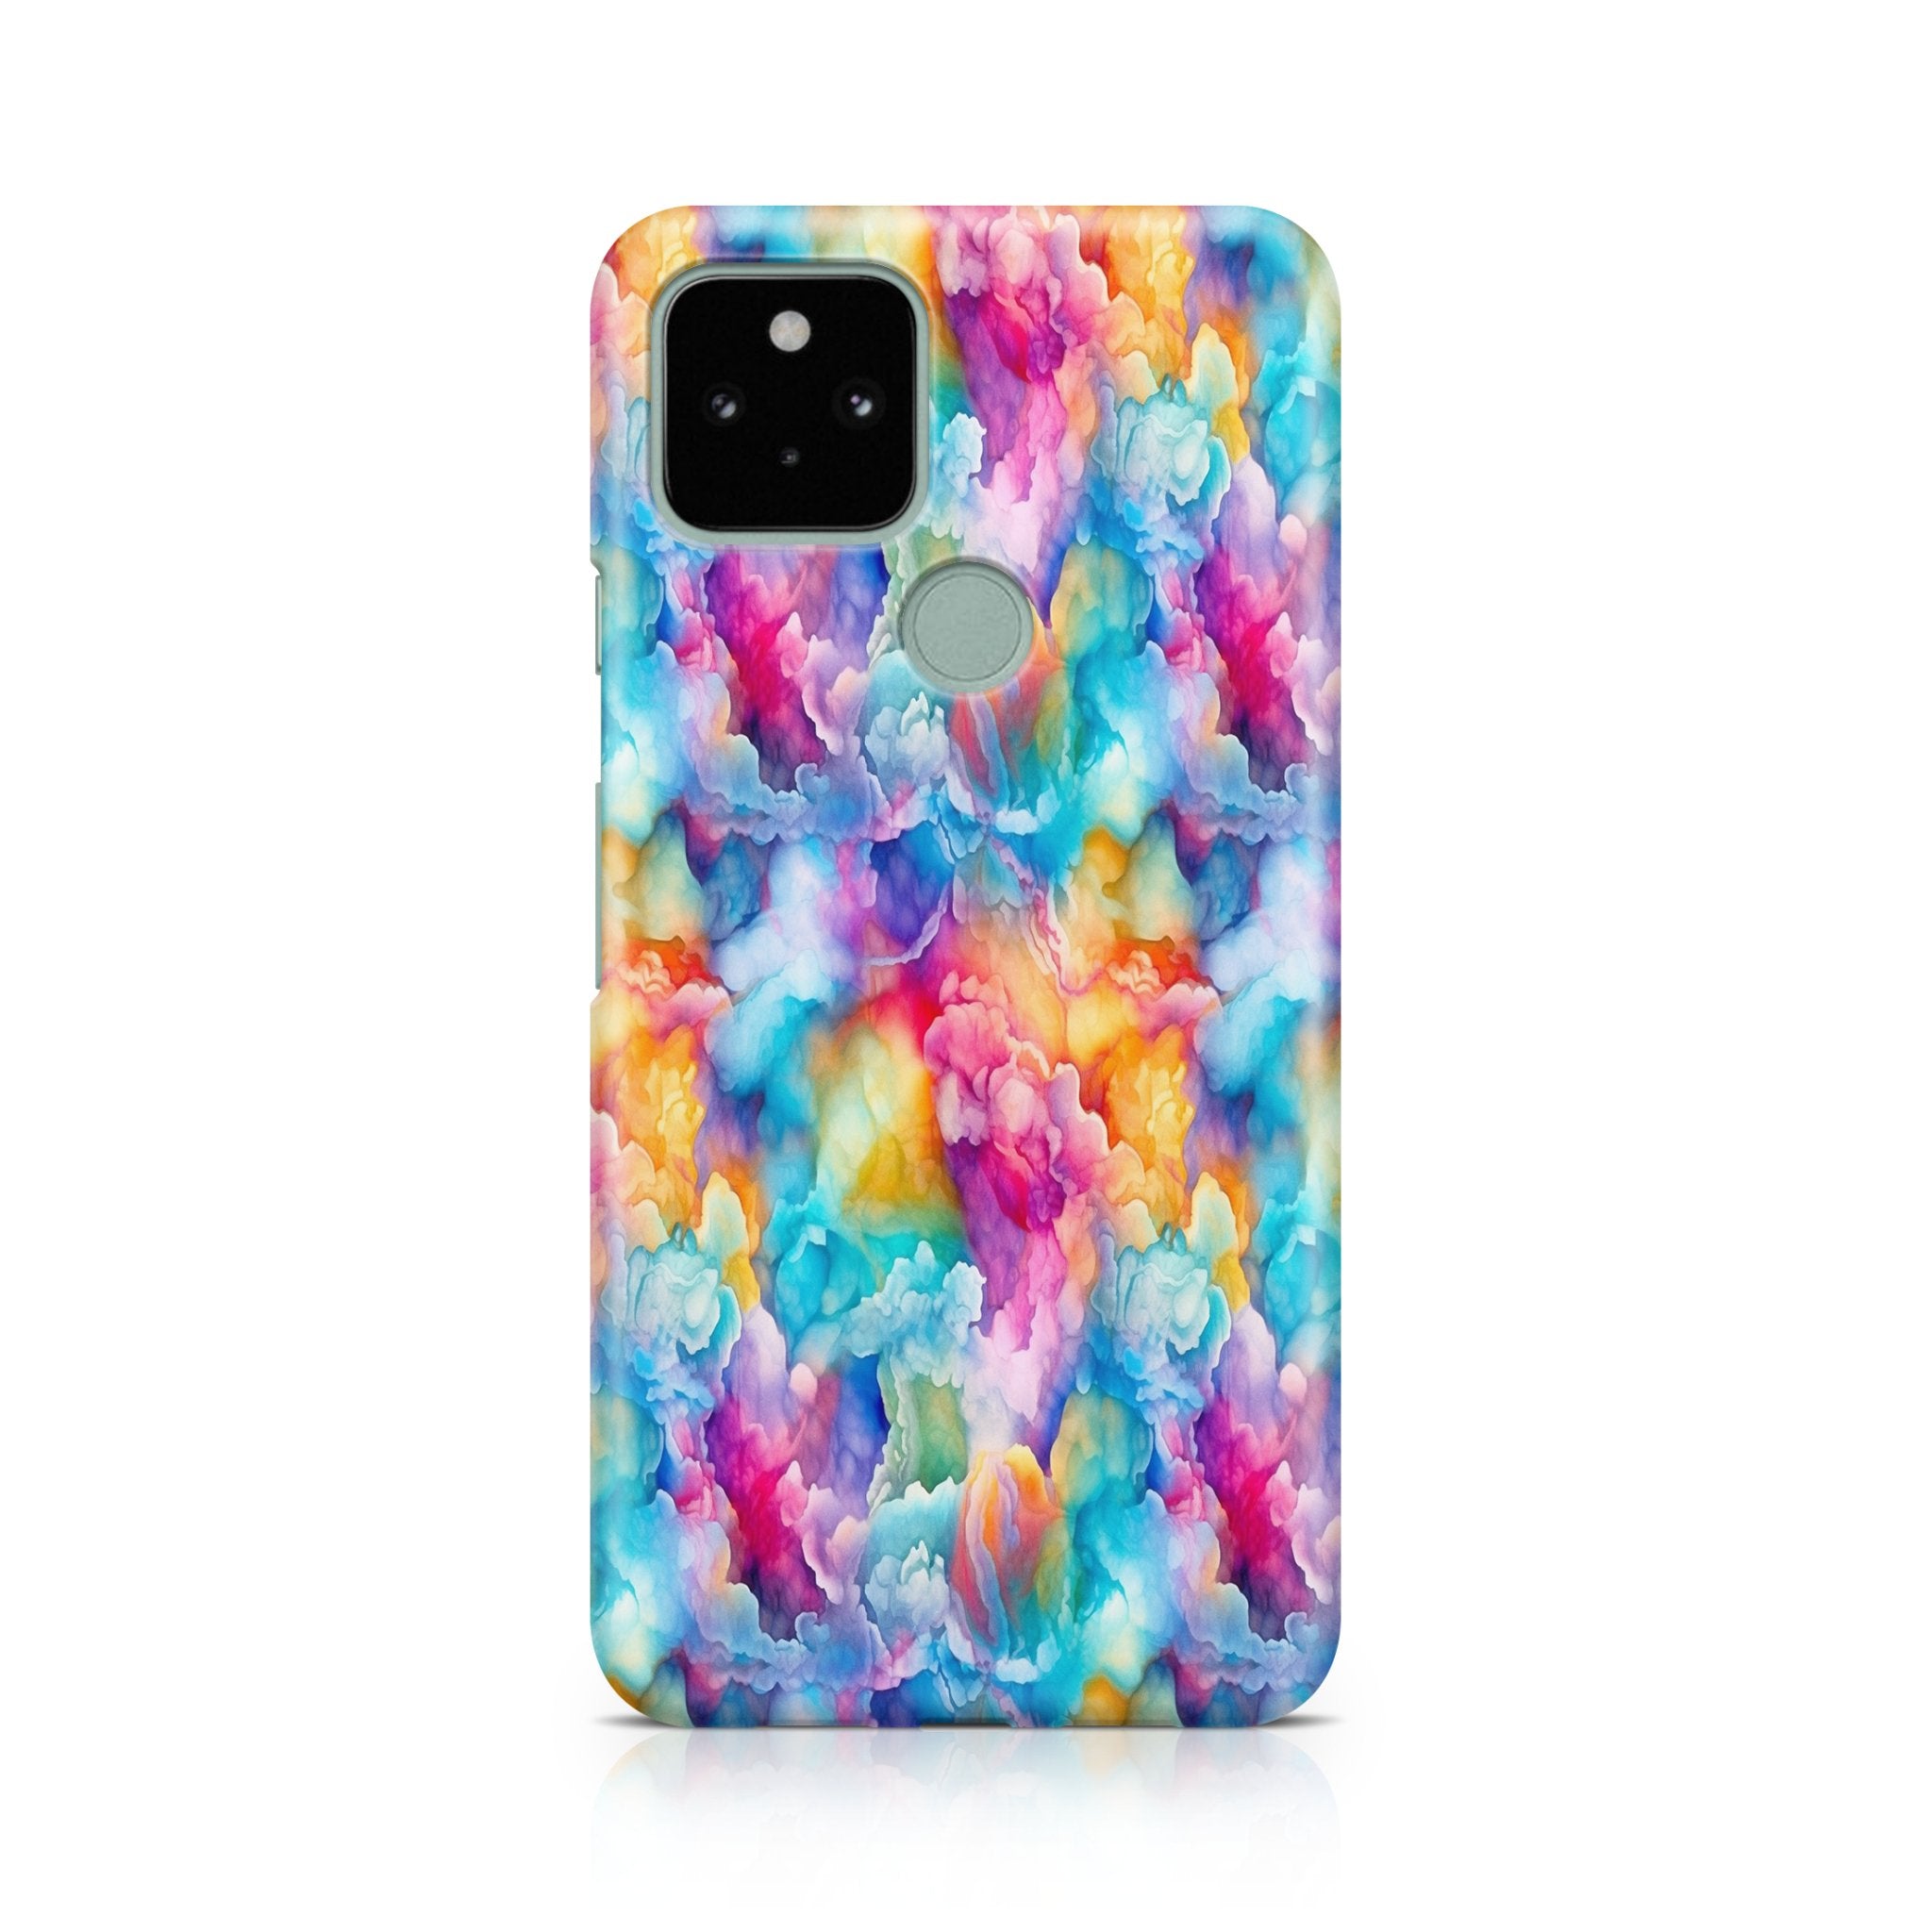 Cloudy Rainbow - Google phone case designs by CaseSwagger